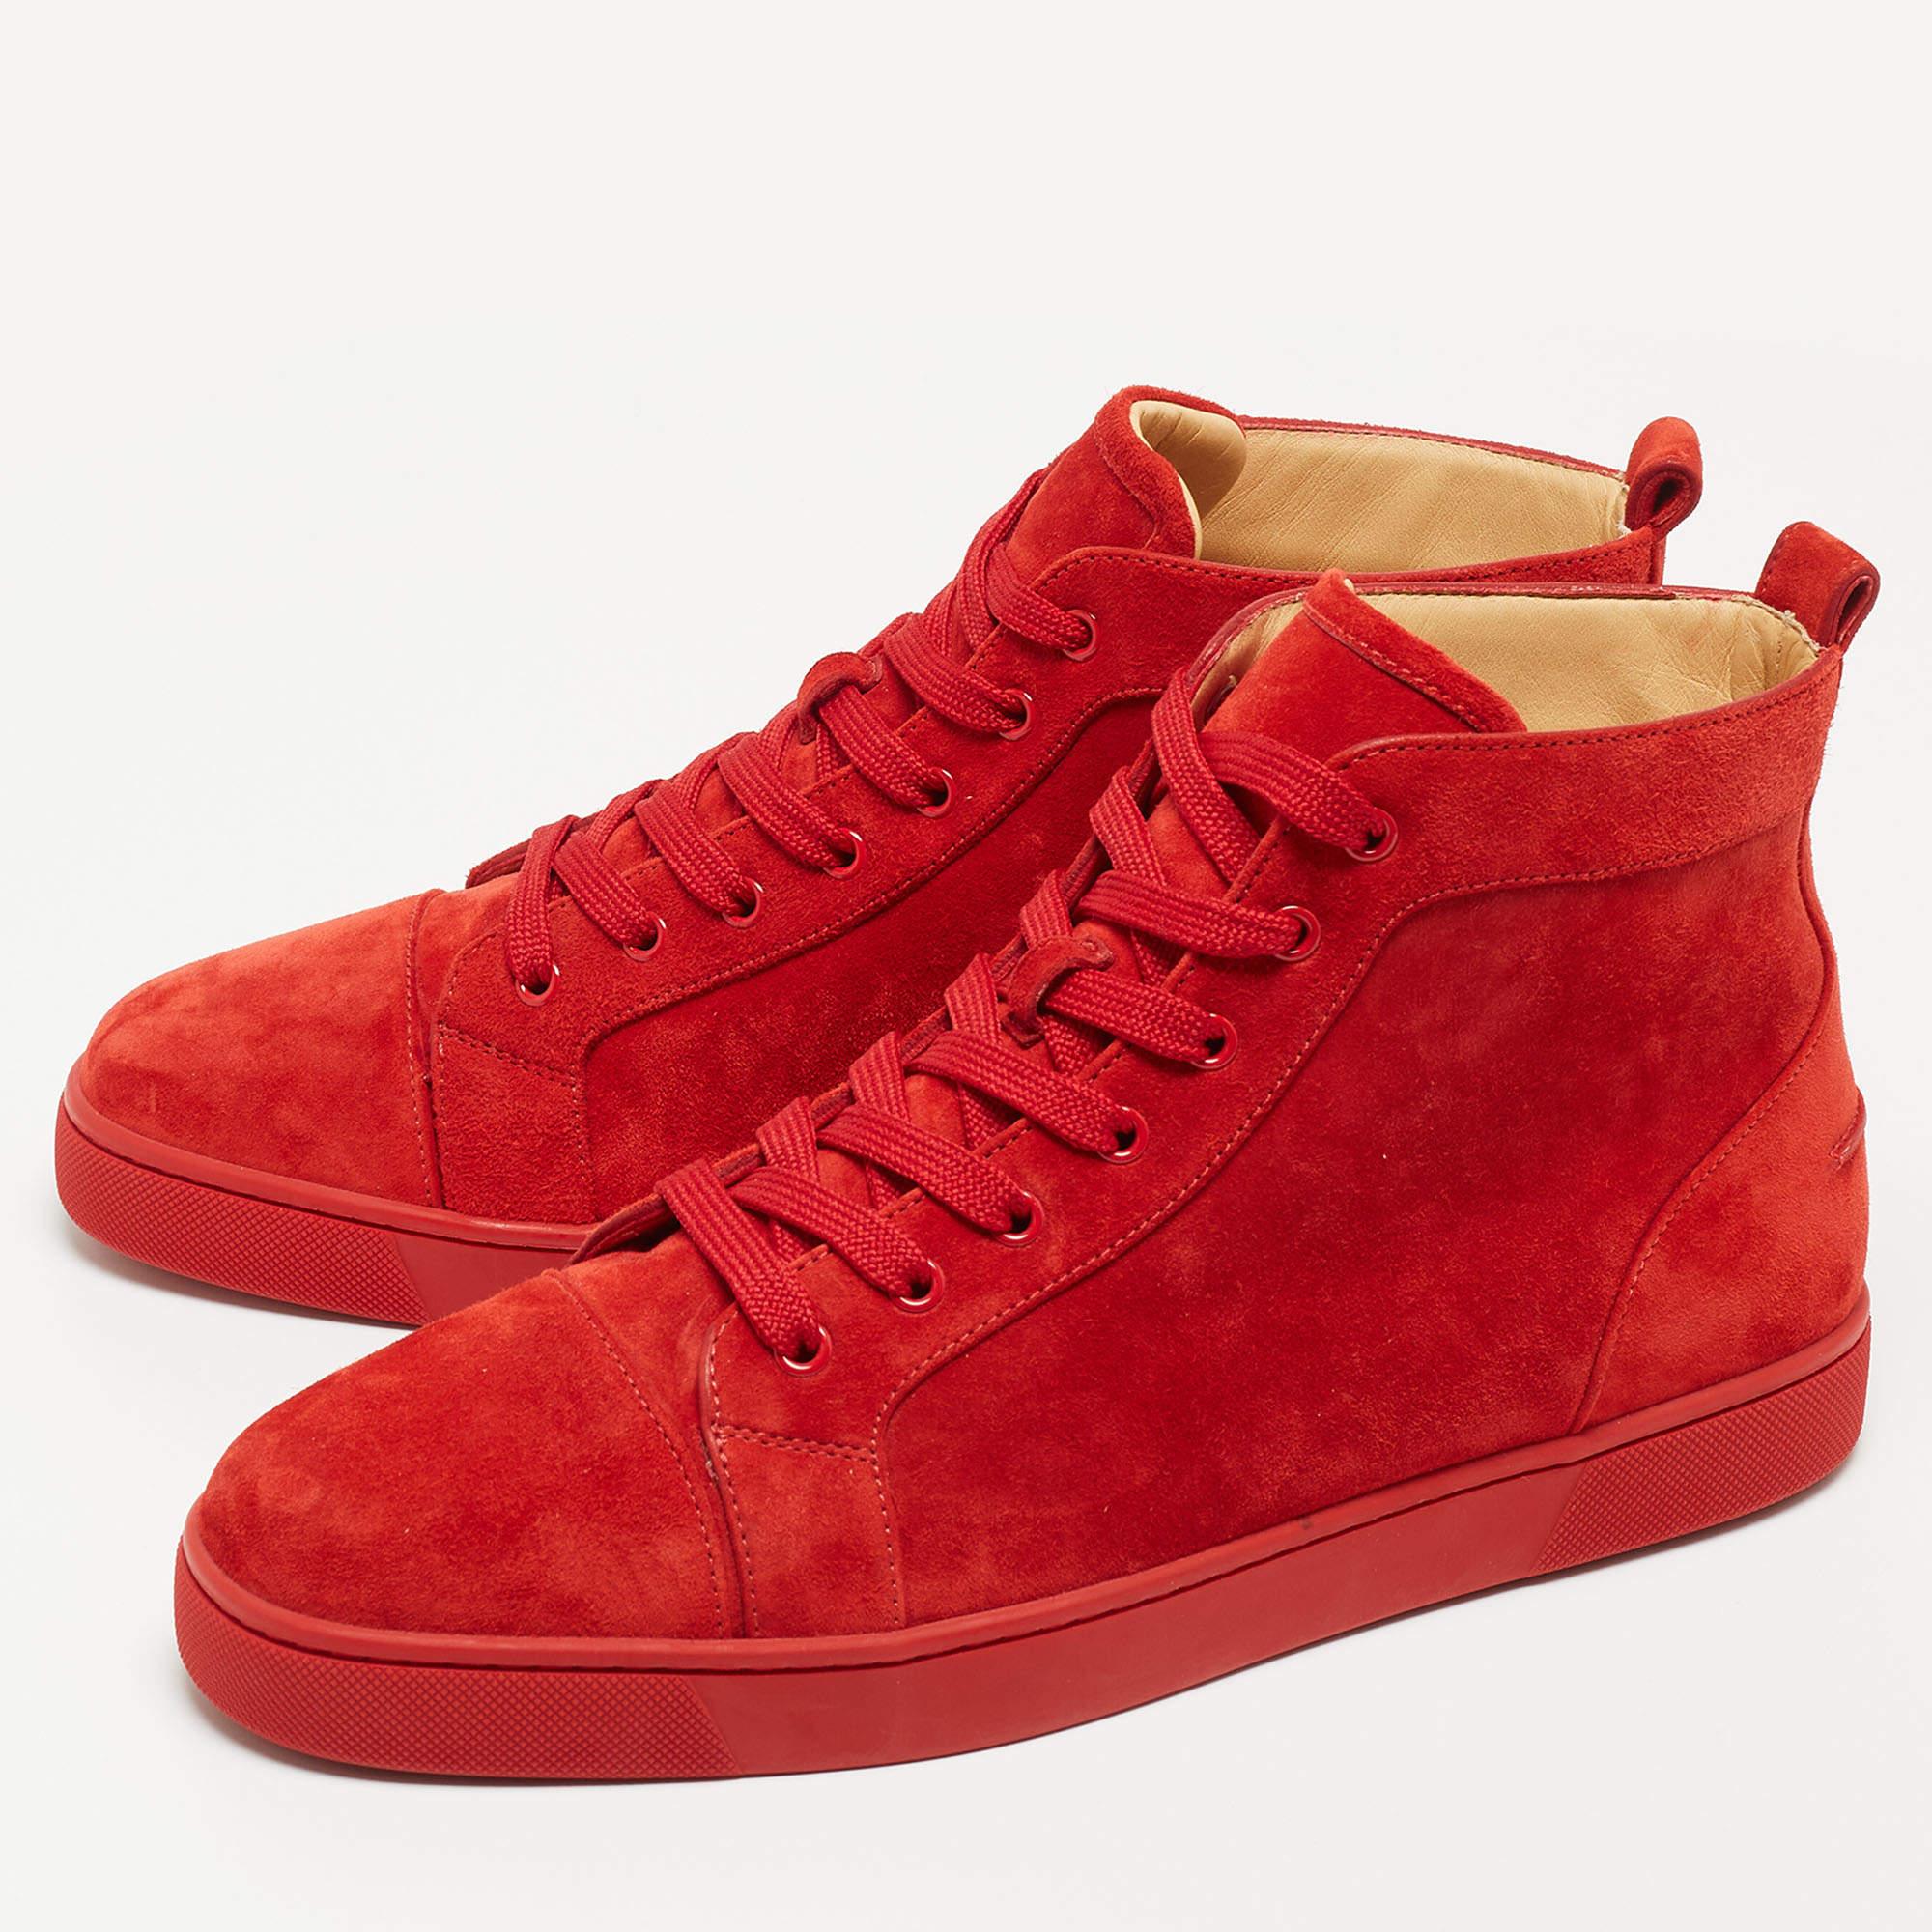 Christian Louboutin Red suede Louis High Top Sneakers Size 44.5 3